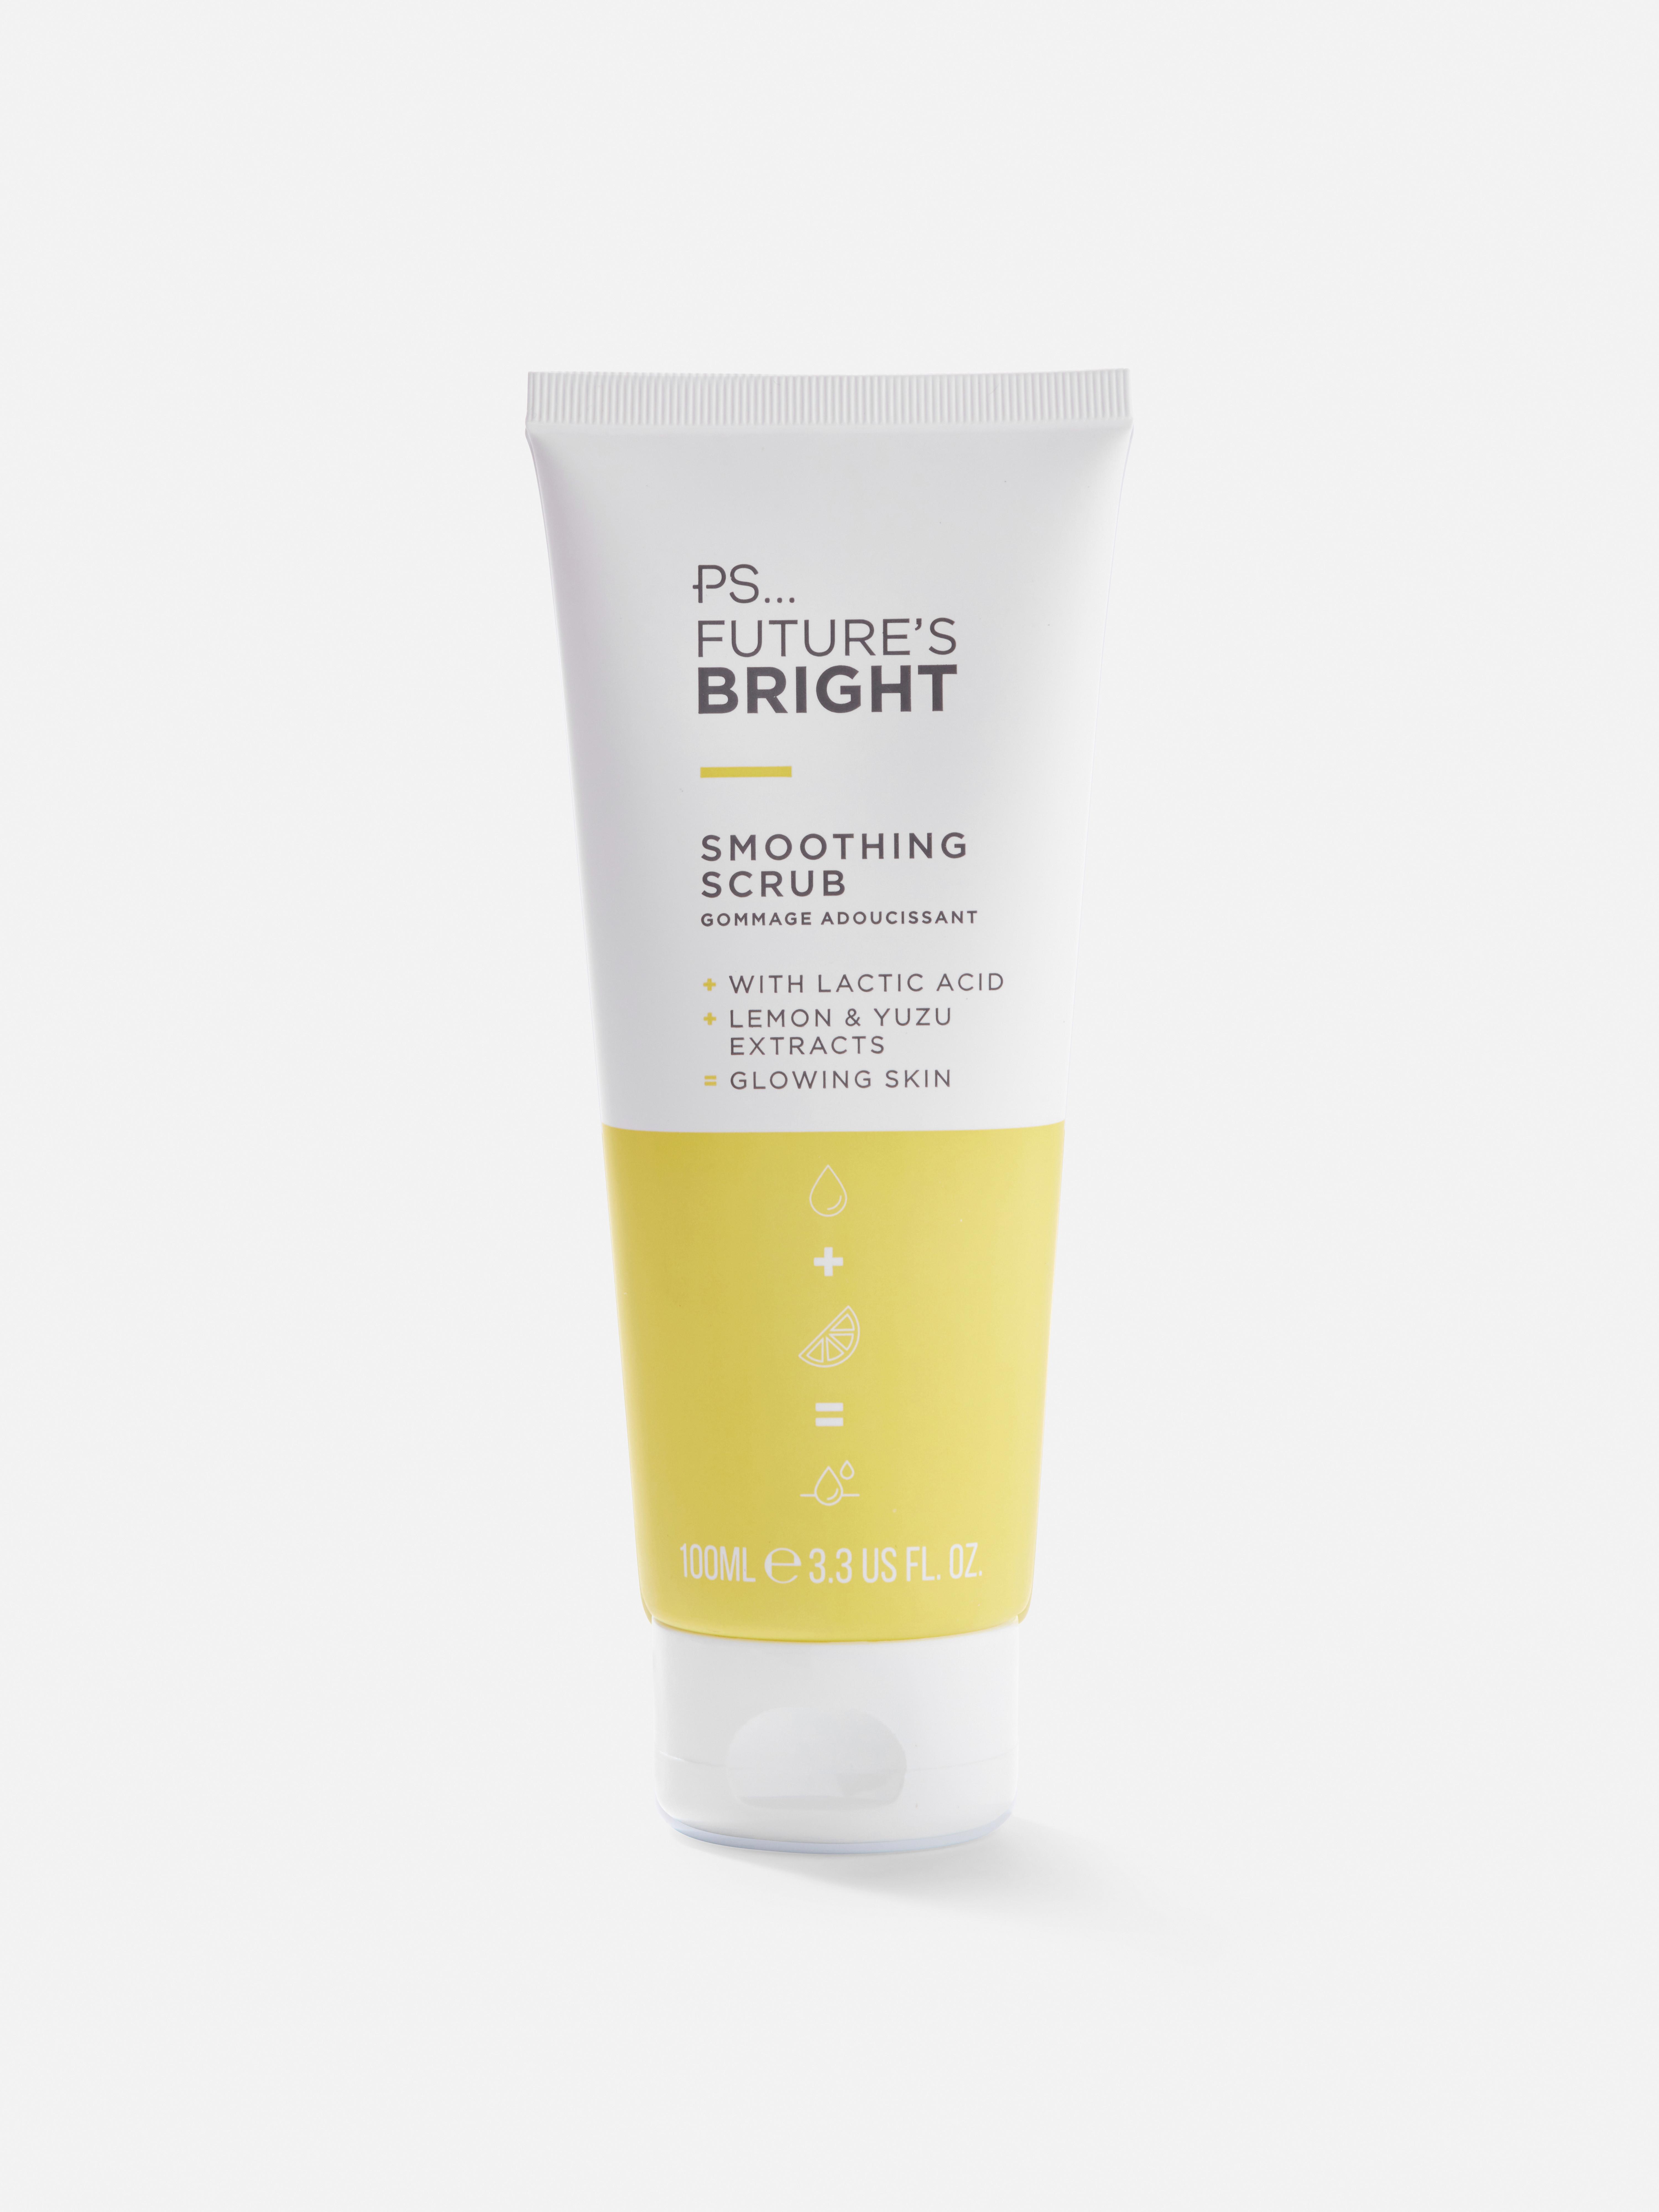 PS... Future's Bright Smoothing Scrub